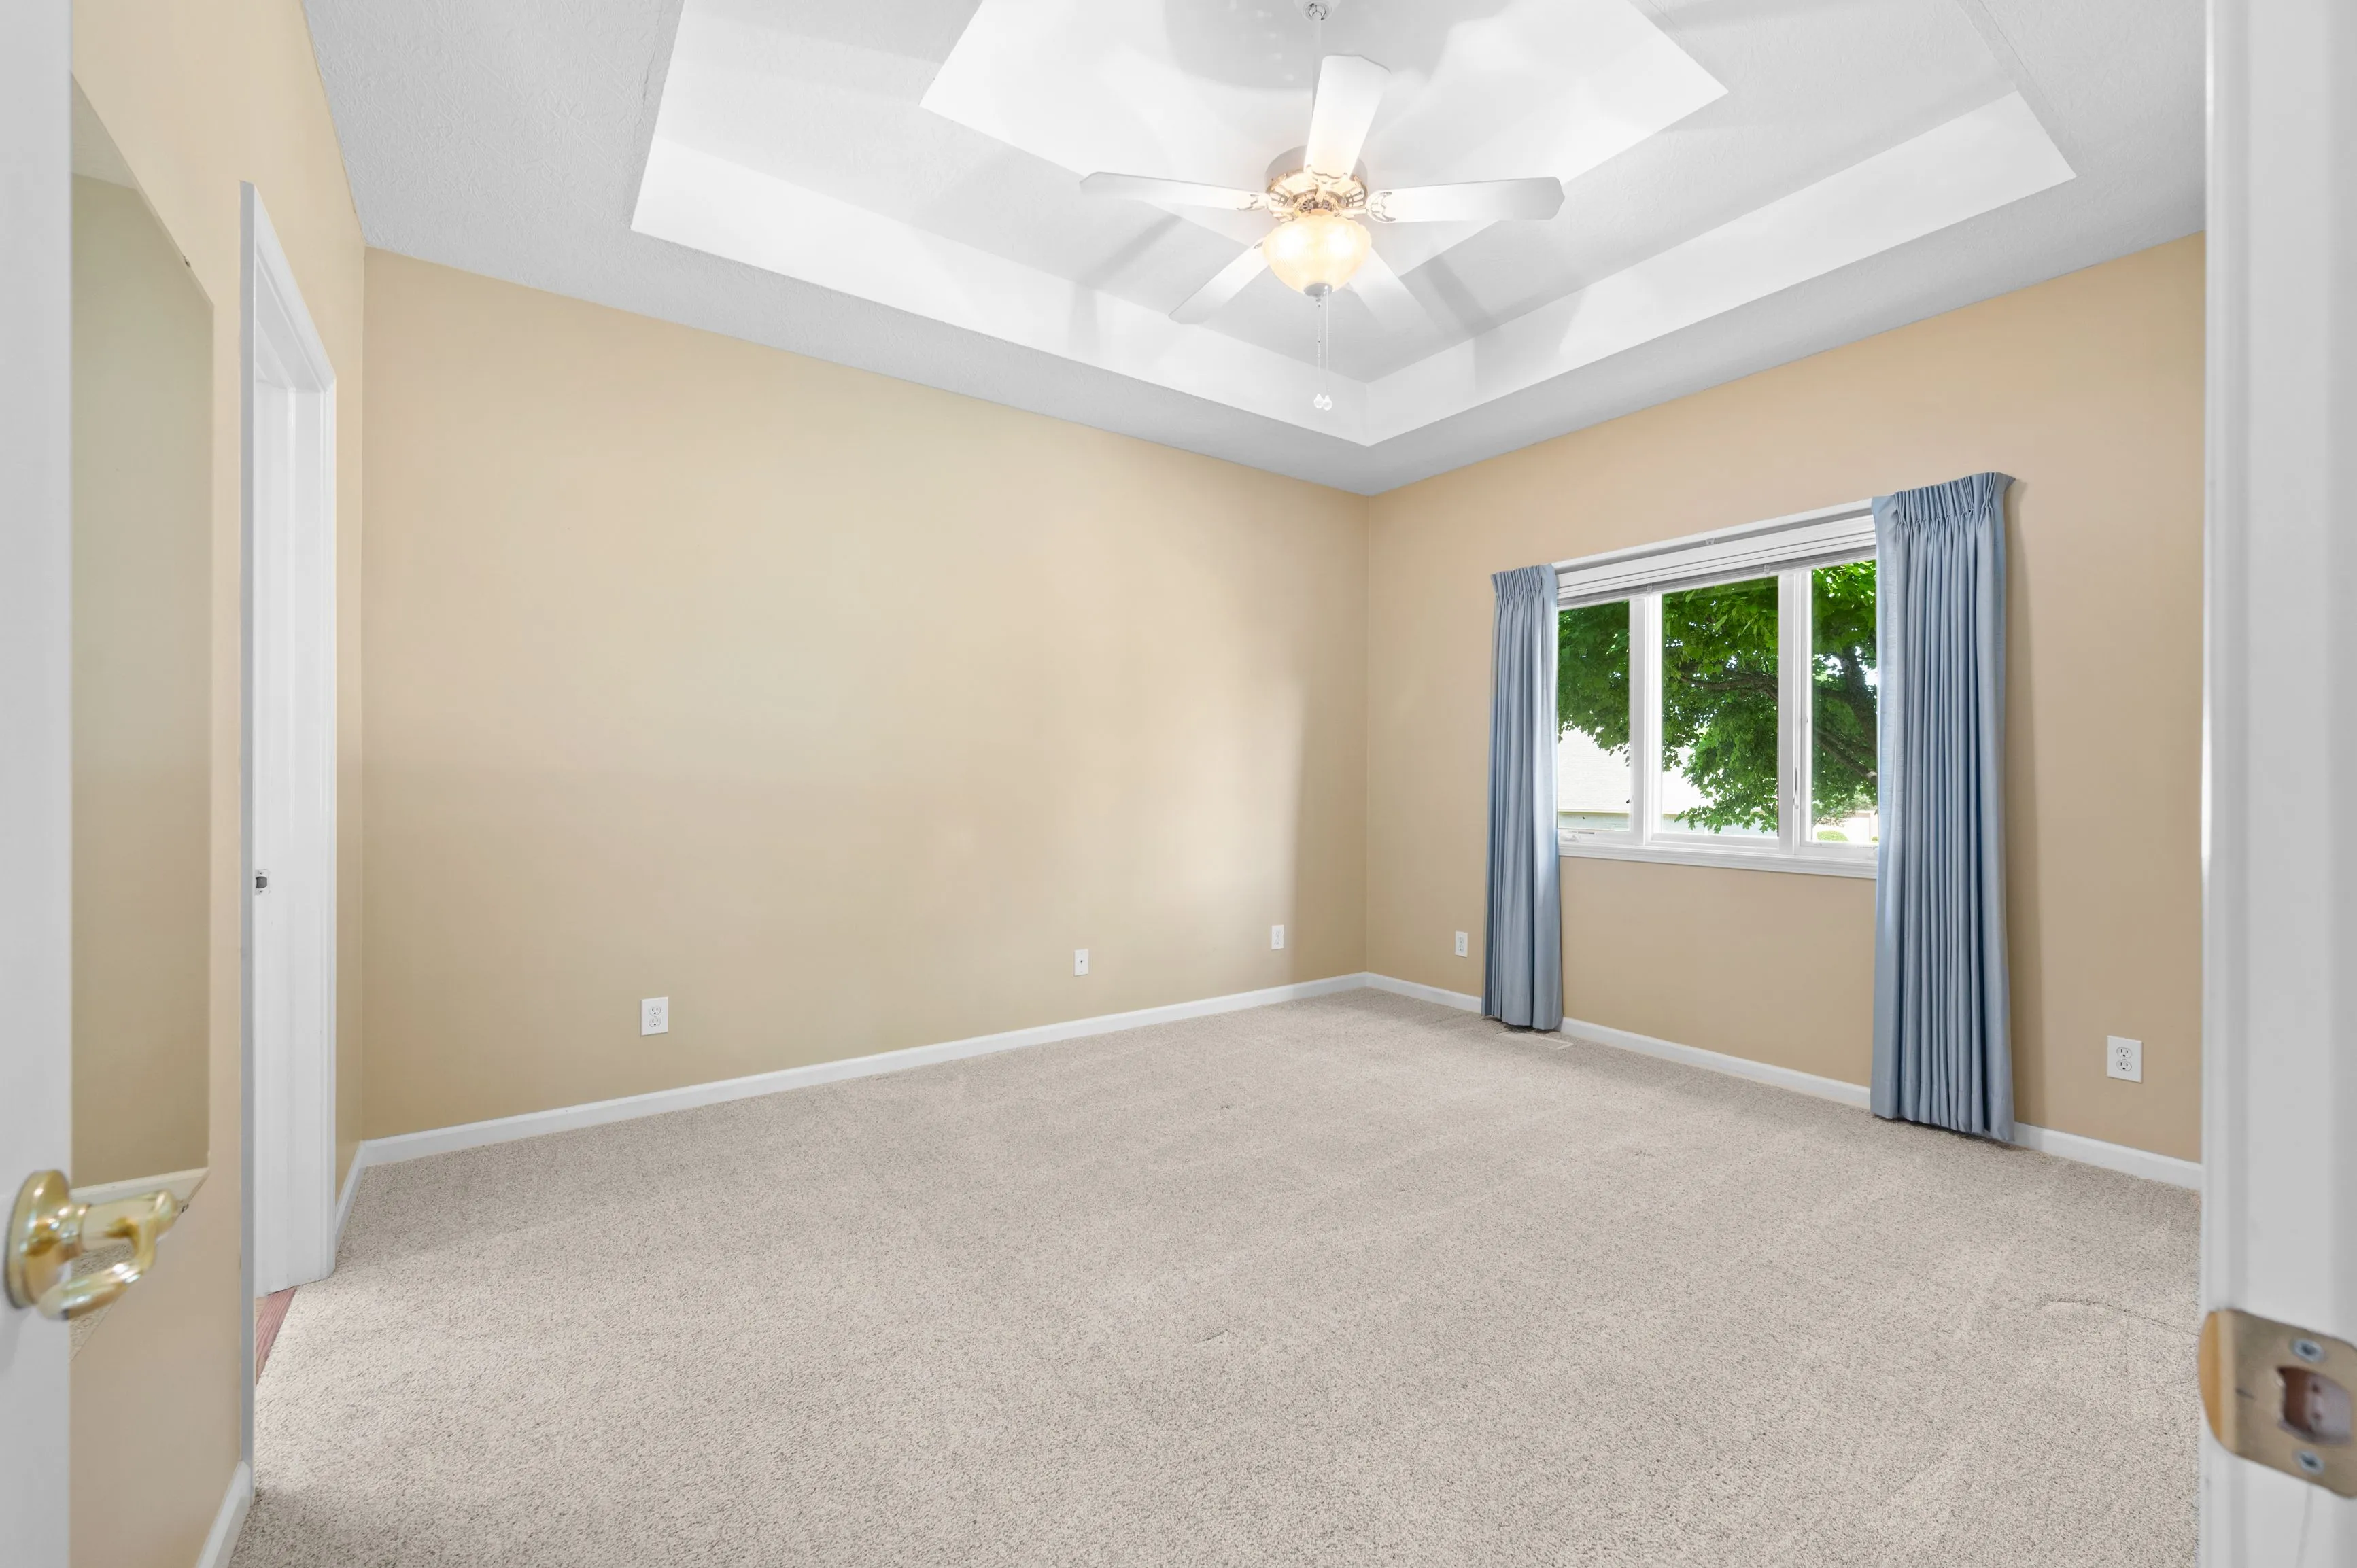 Empty room with beige walls, carpet flooring, window with blue curtains, and a ceiling fan.